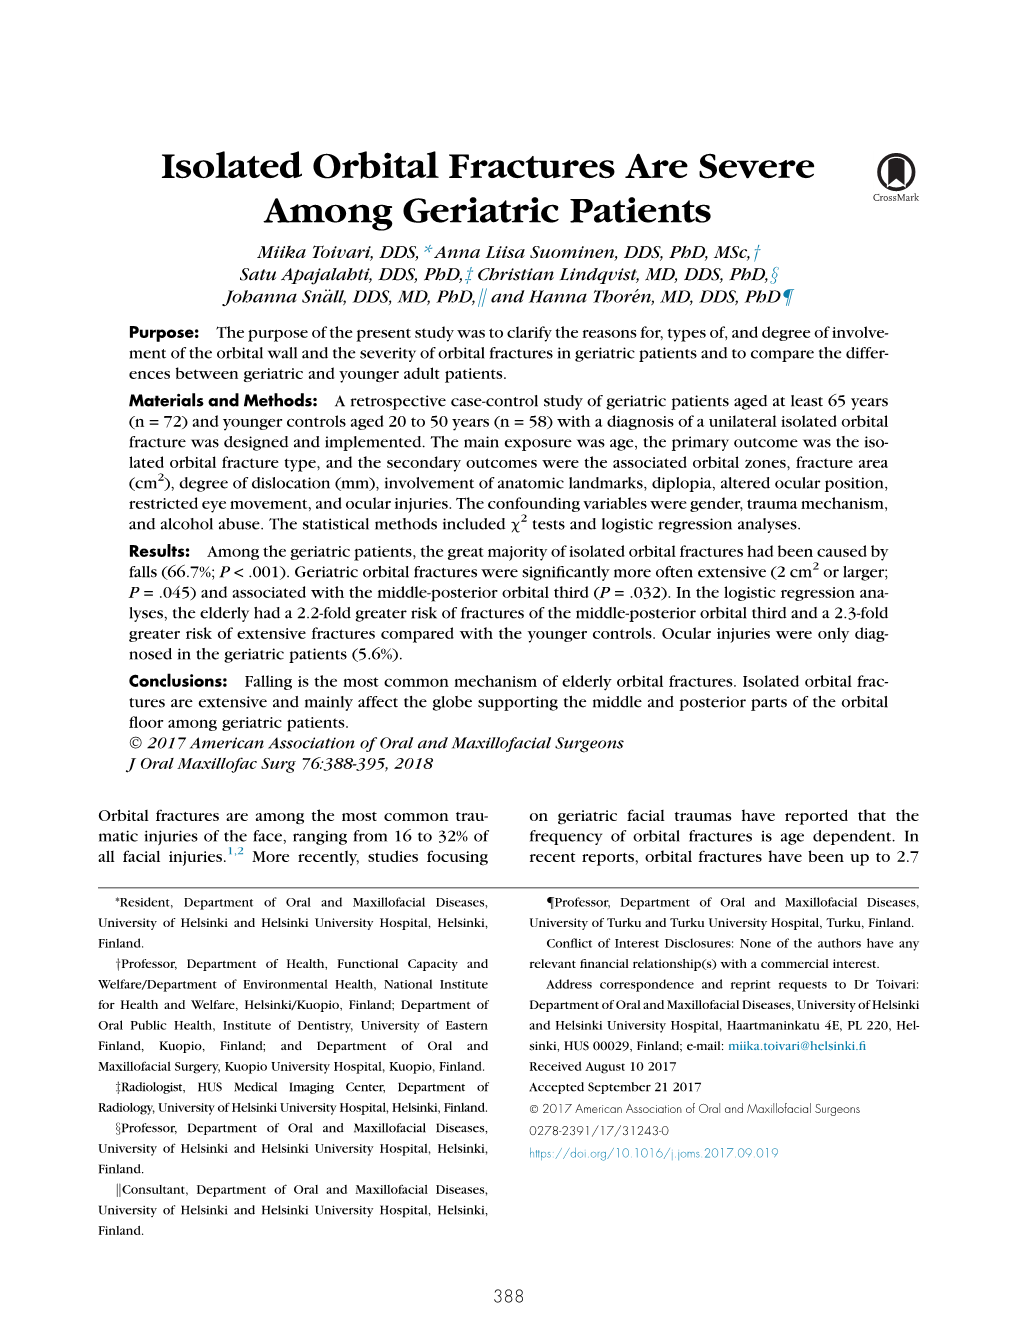 Isolated Orbital Fractures Are Severe Among Geriatric Patients